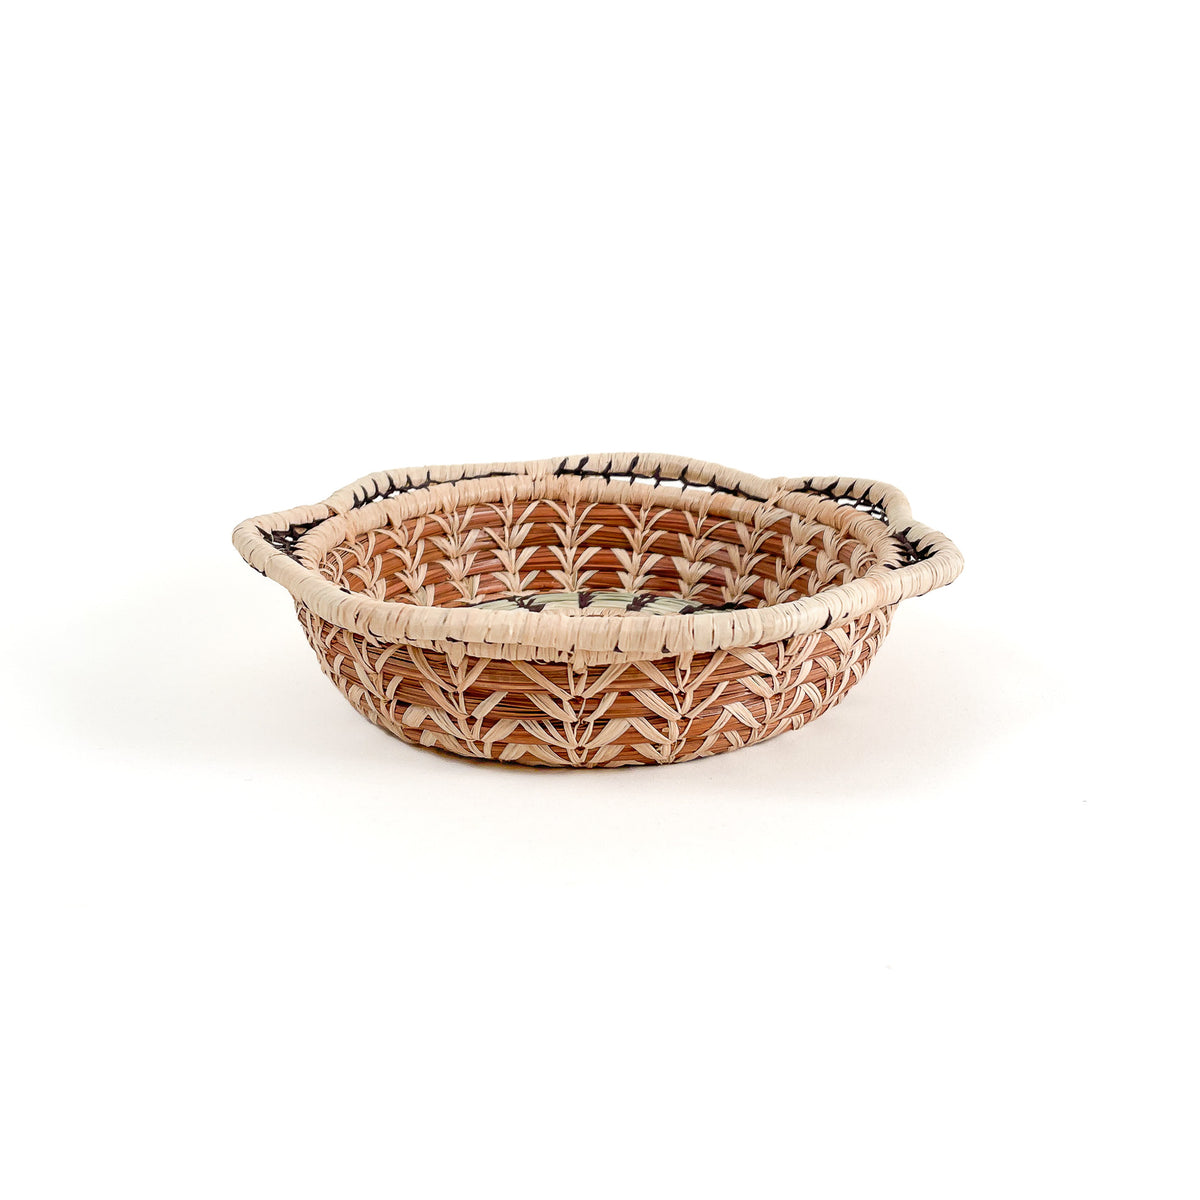 Pine needle and pajon basket with wavy edges - side view